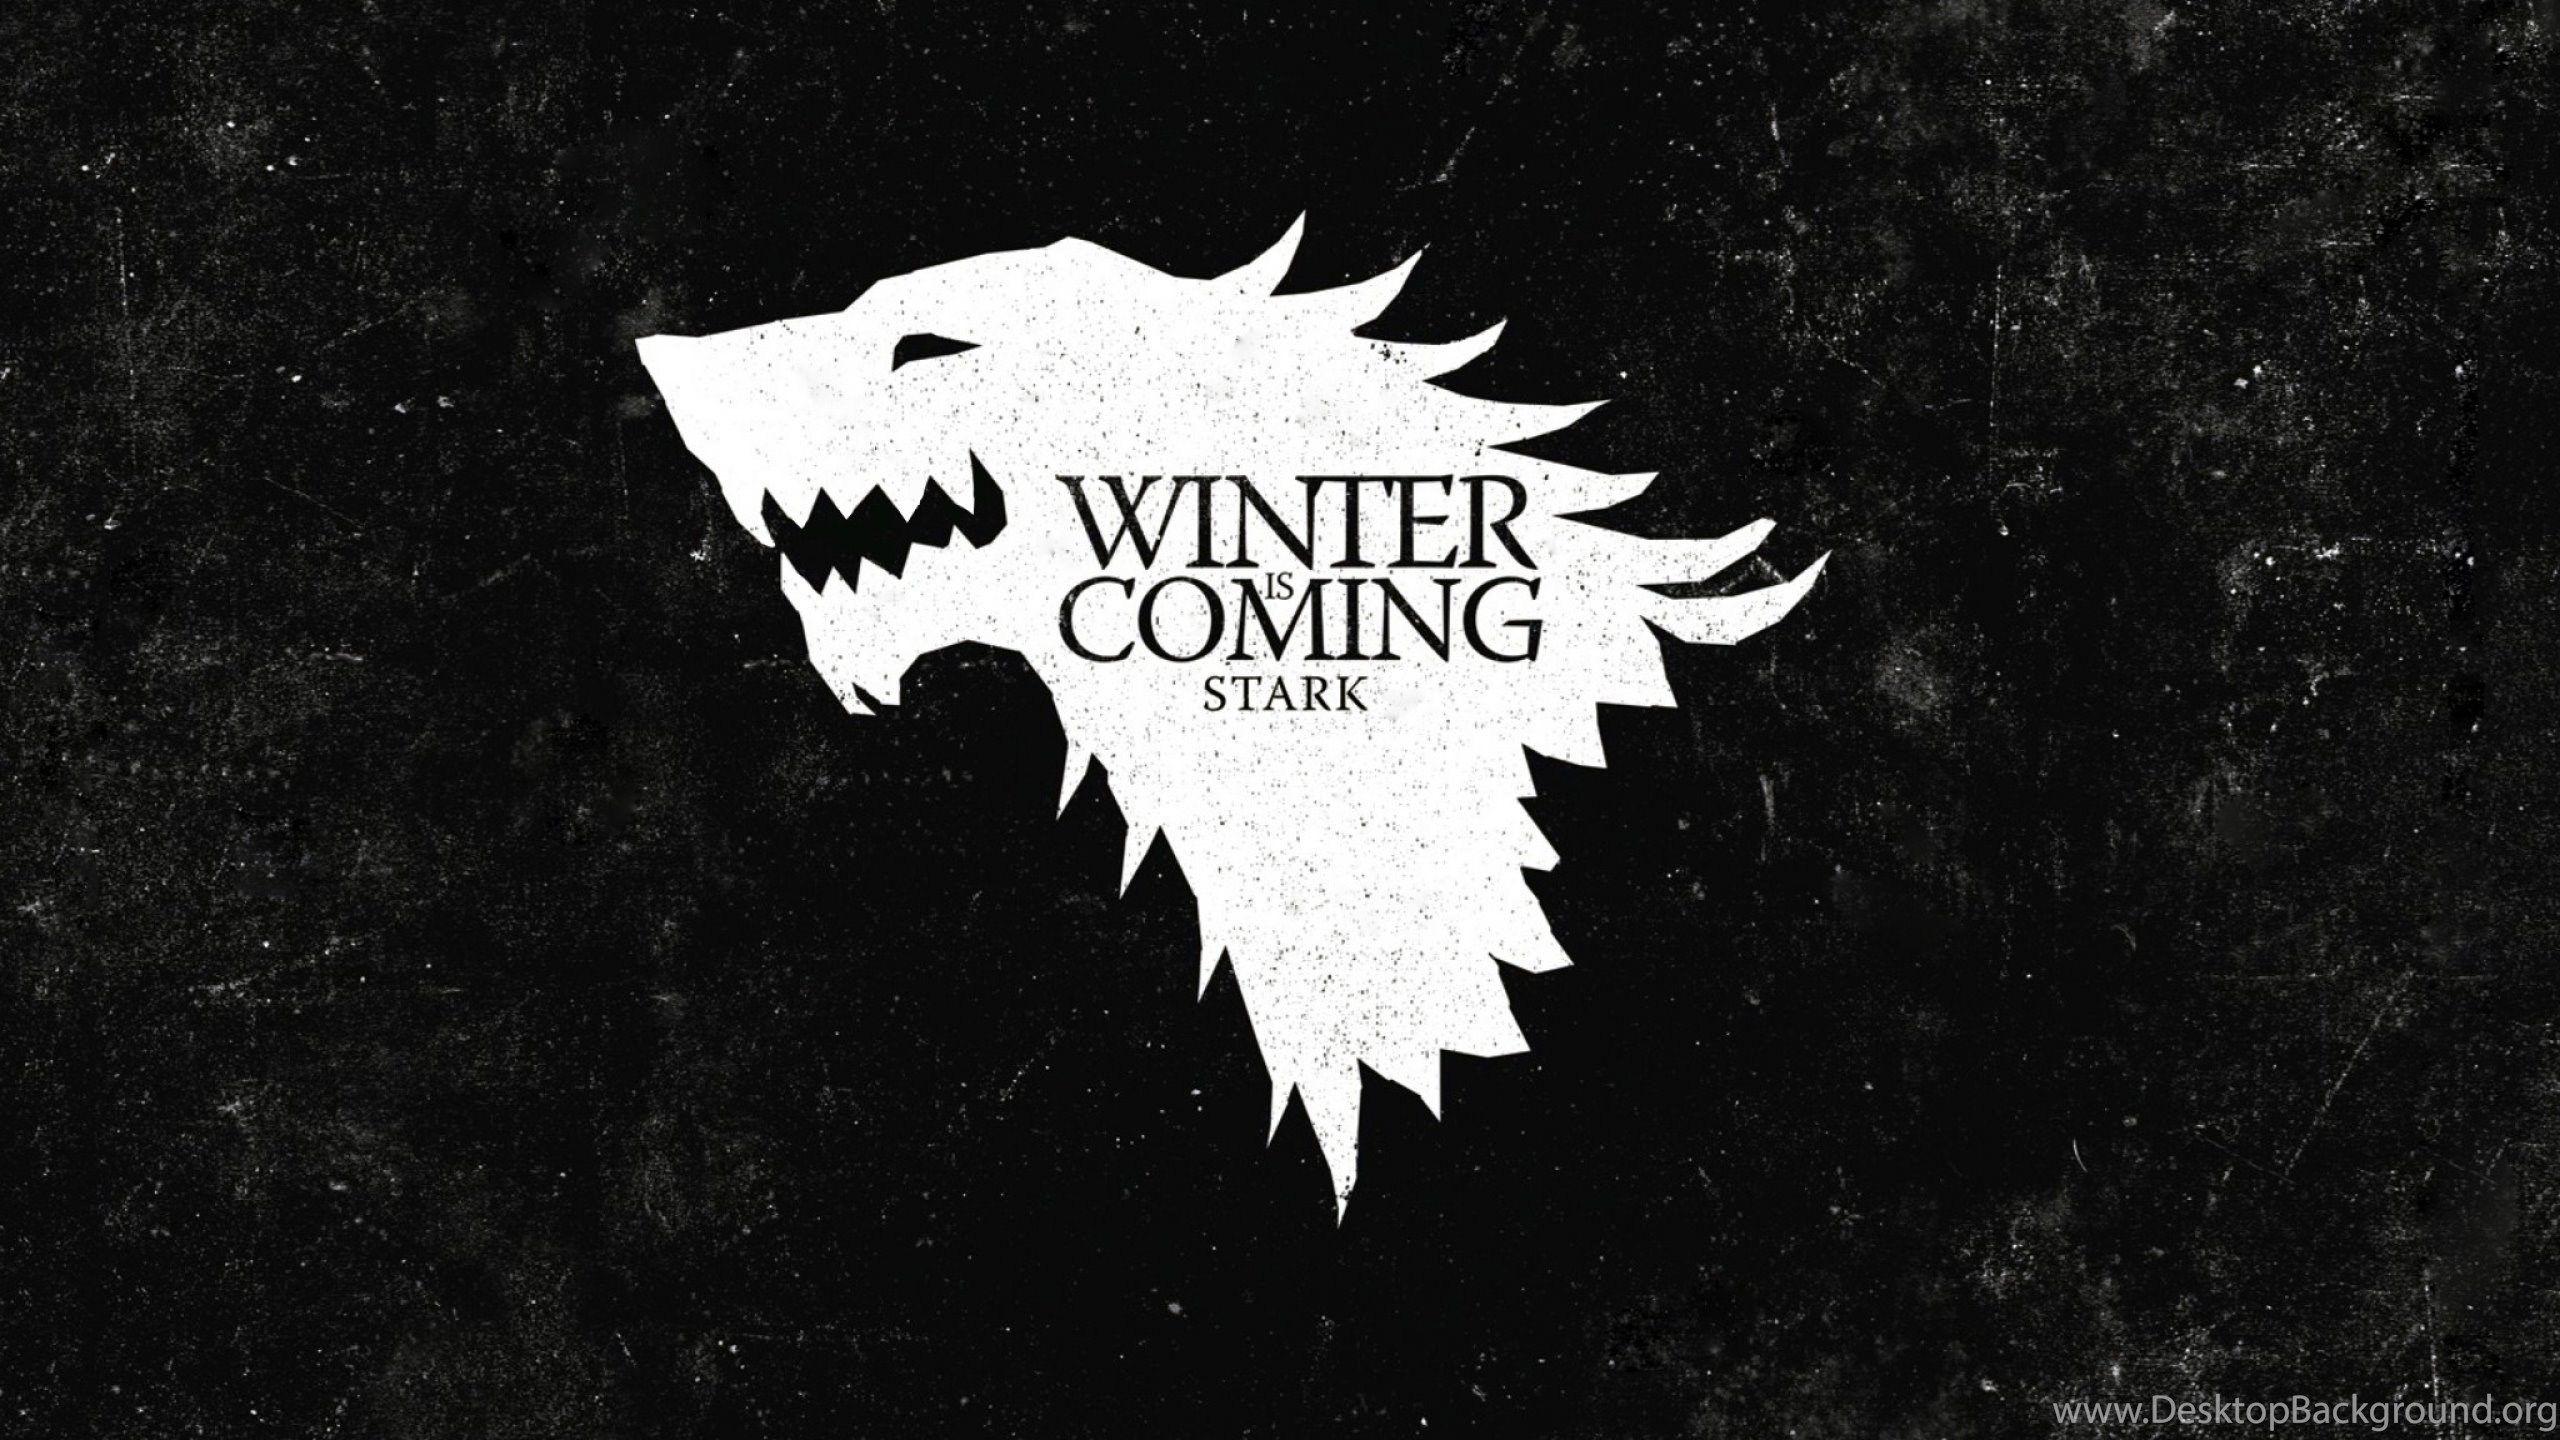 Game of Thrones Winter Is Here Wallpaper Free Game